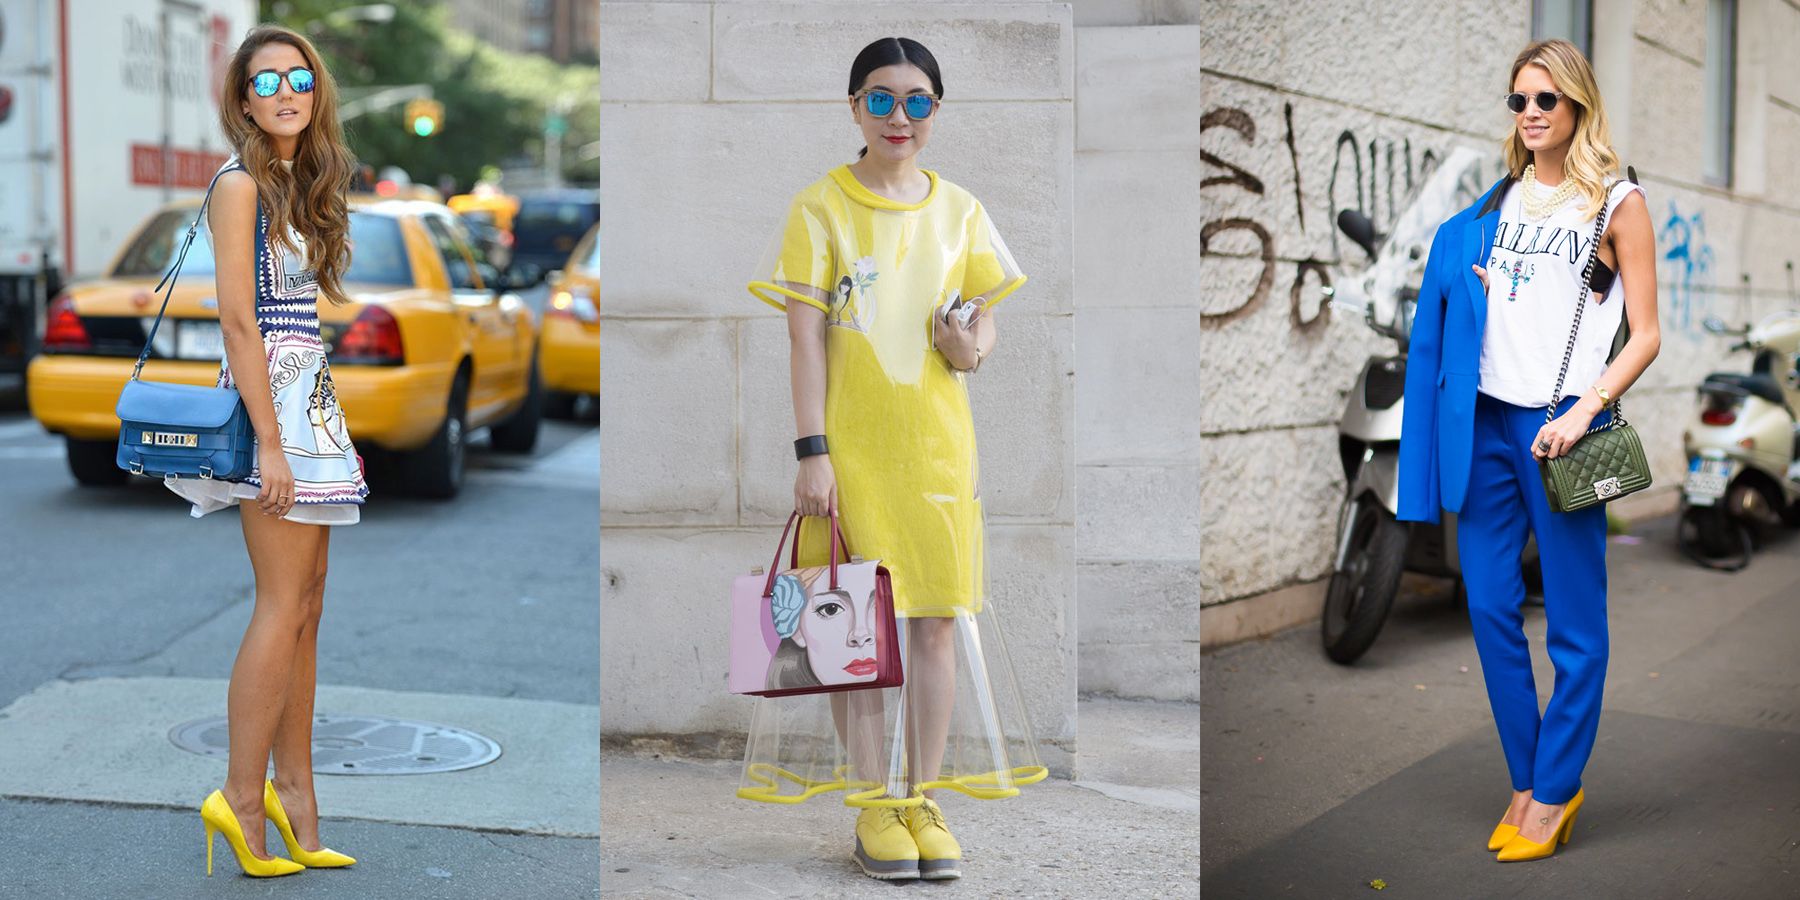 More Fresh and Fashionable with a Touch of Strong Yellow!